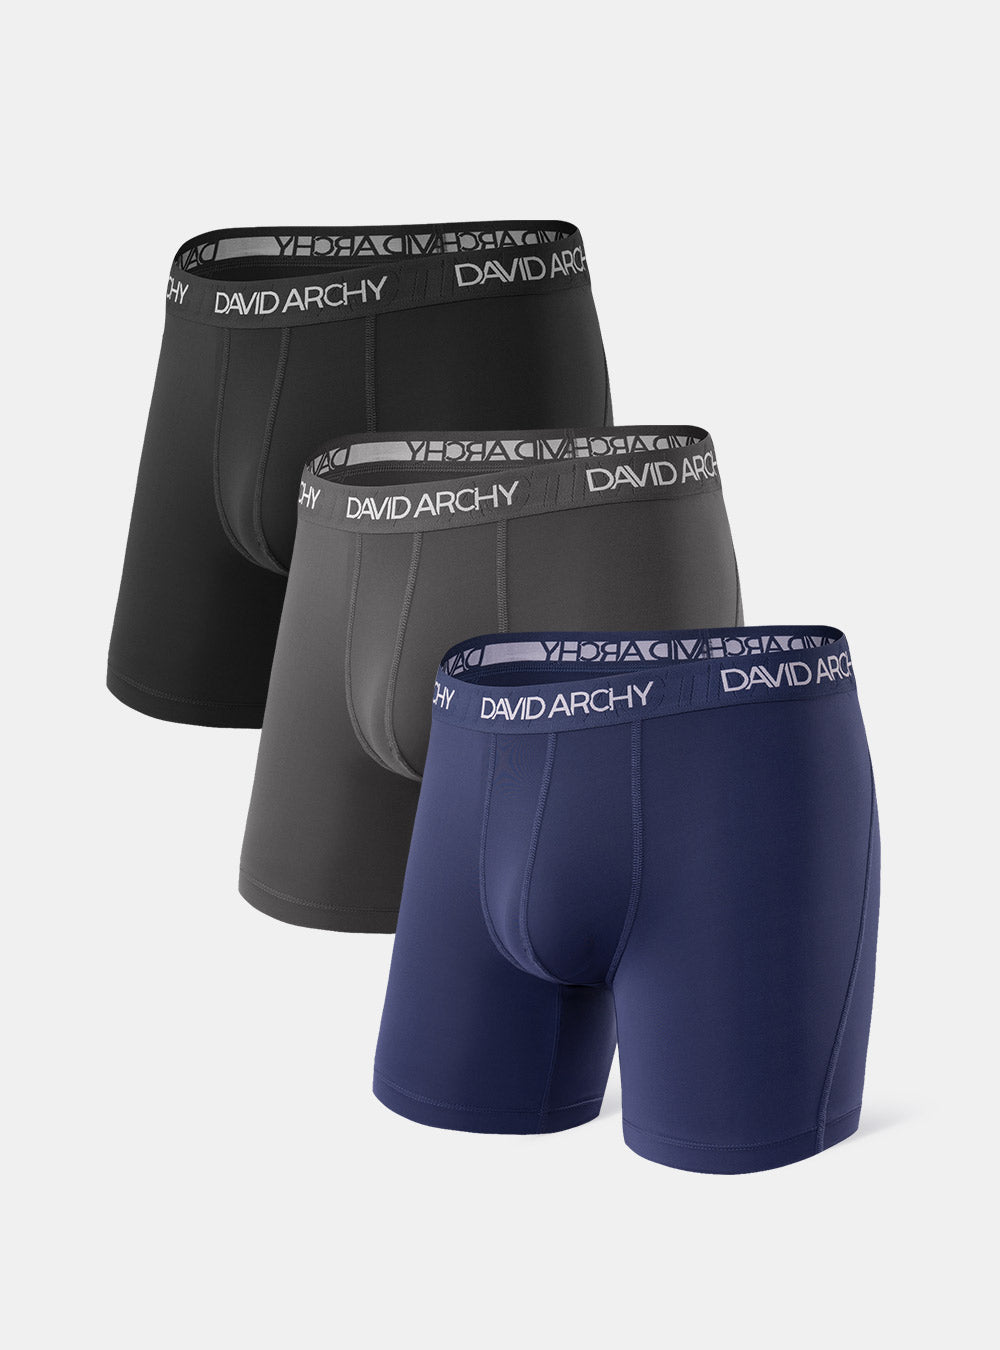  DAVID ARCHY Mens Underwear Micro Modal Dual Pouch Trunks  Support Ball Pouch Bulge Enhancing Boxer Briefs For Men 3 Pack